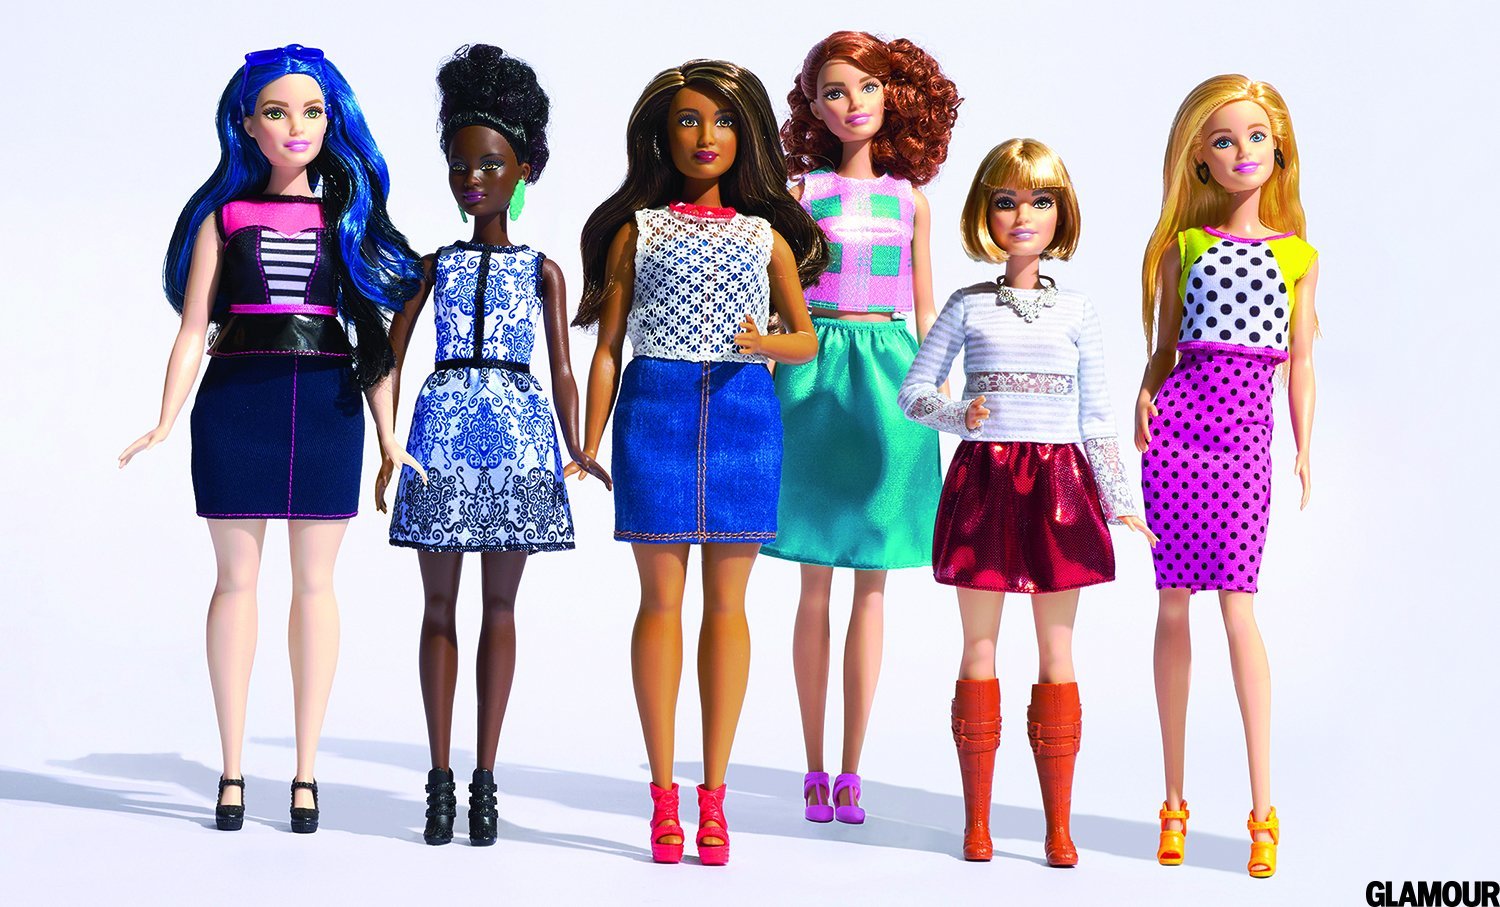 barbie different body types